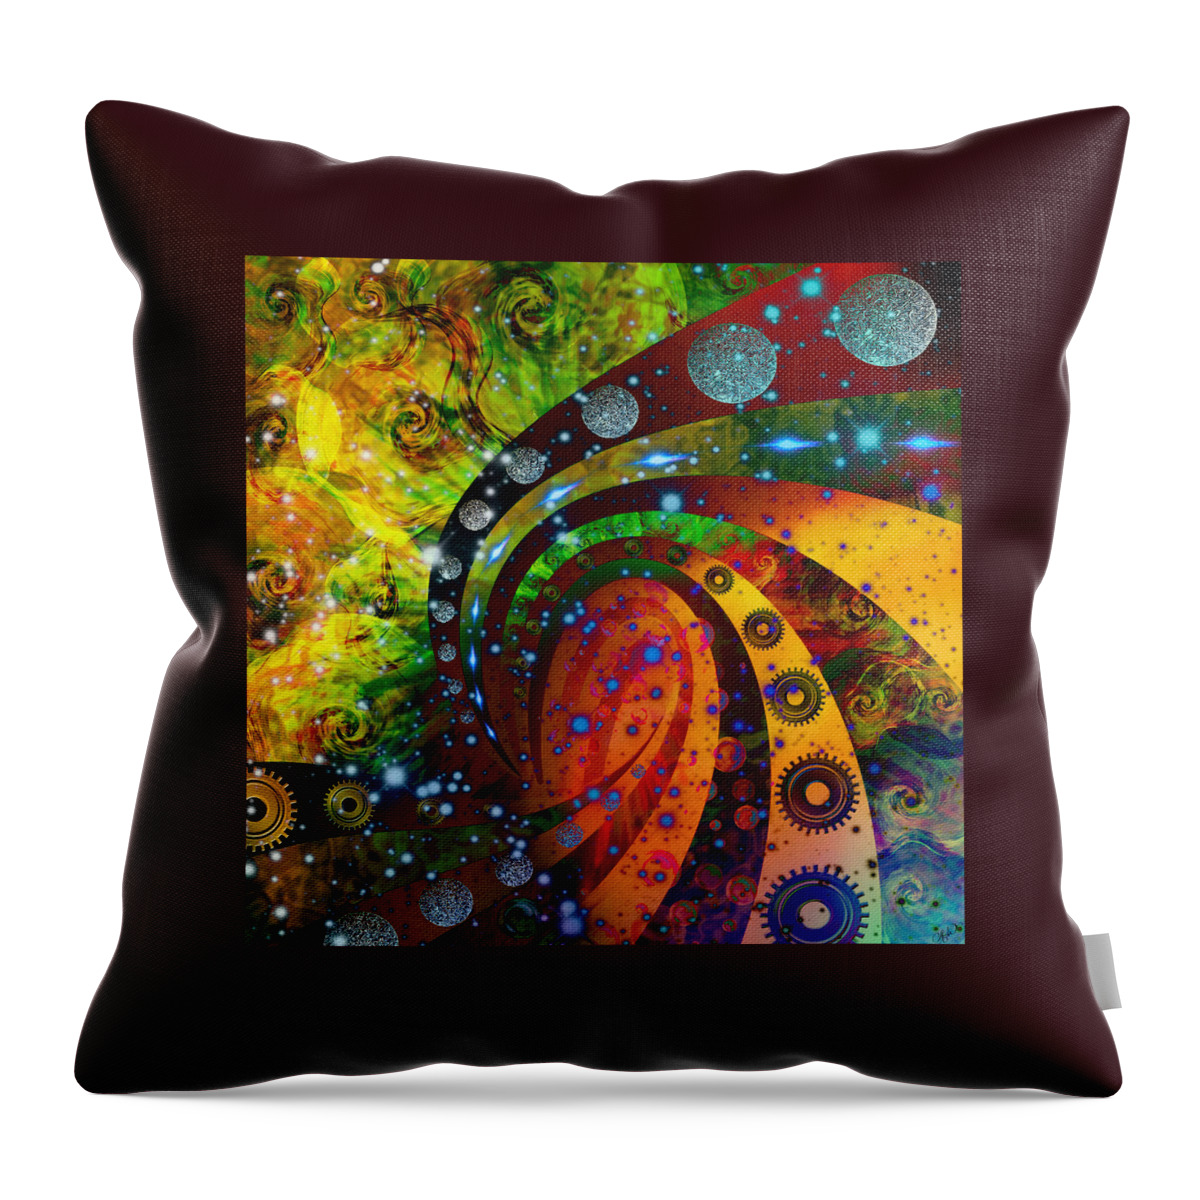 Digital Art Throw Pillow featuring the digital art Inside Consciousness by Ally White